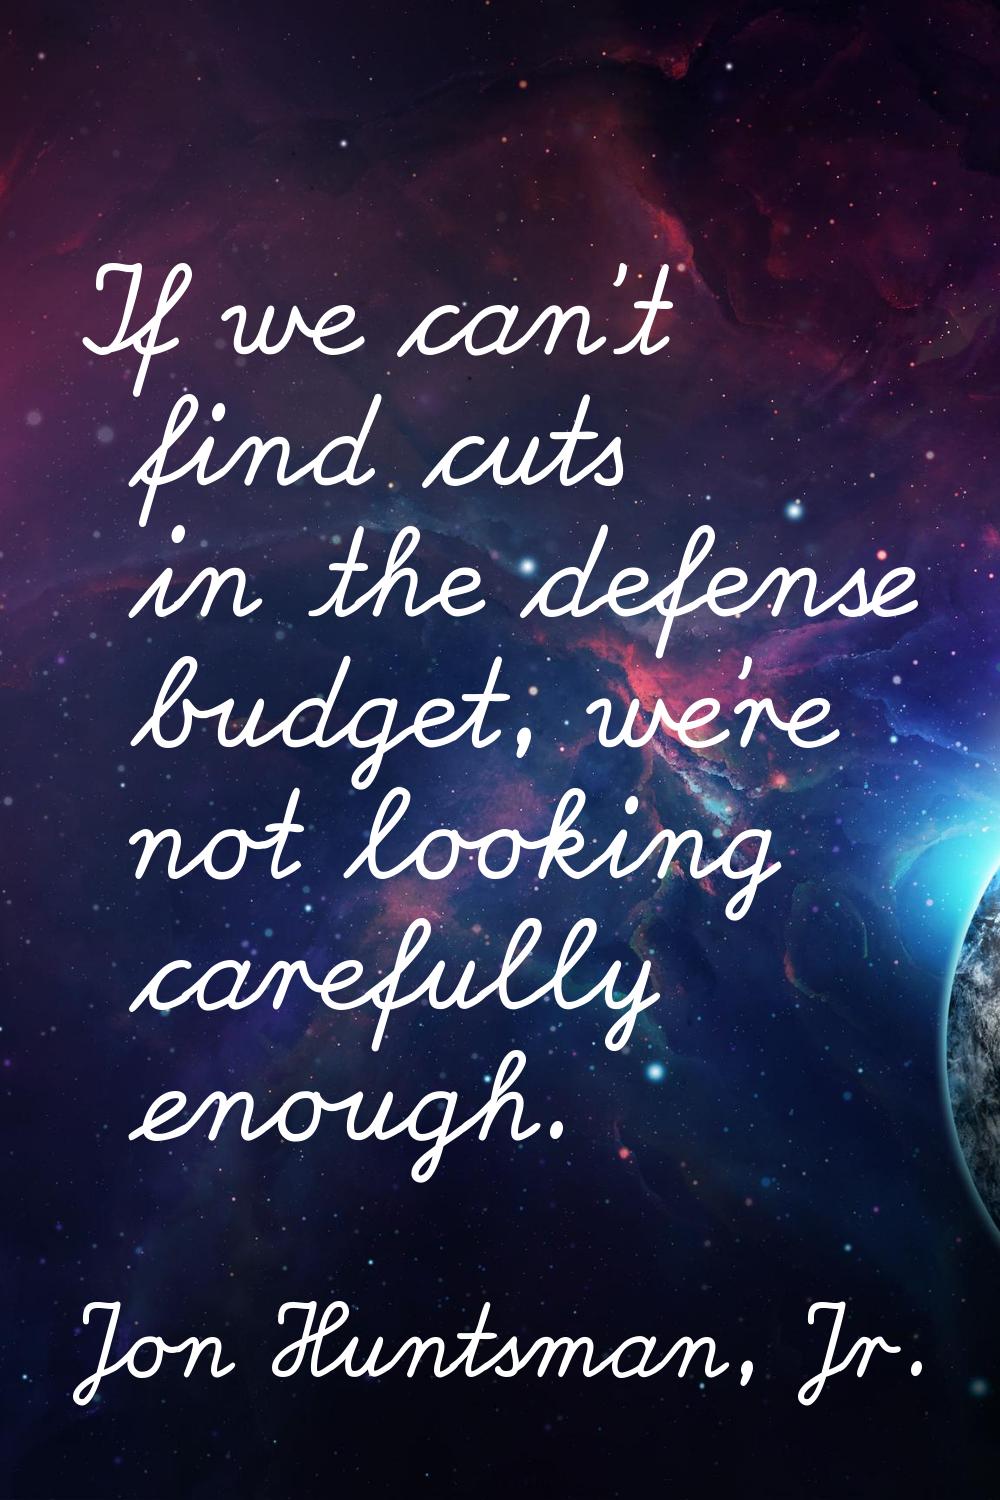 If we can't find cuts in the defense budget, we're not looking carefully enough.